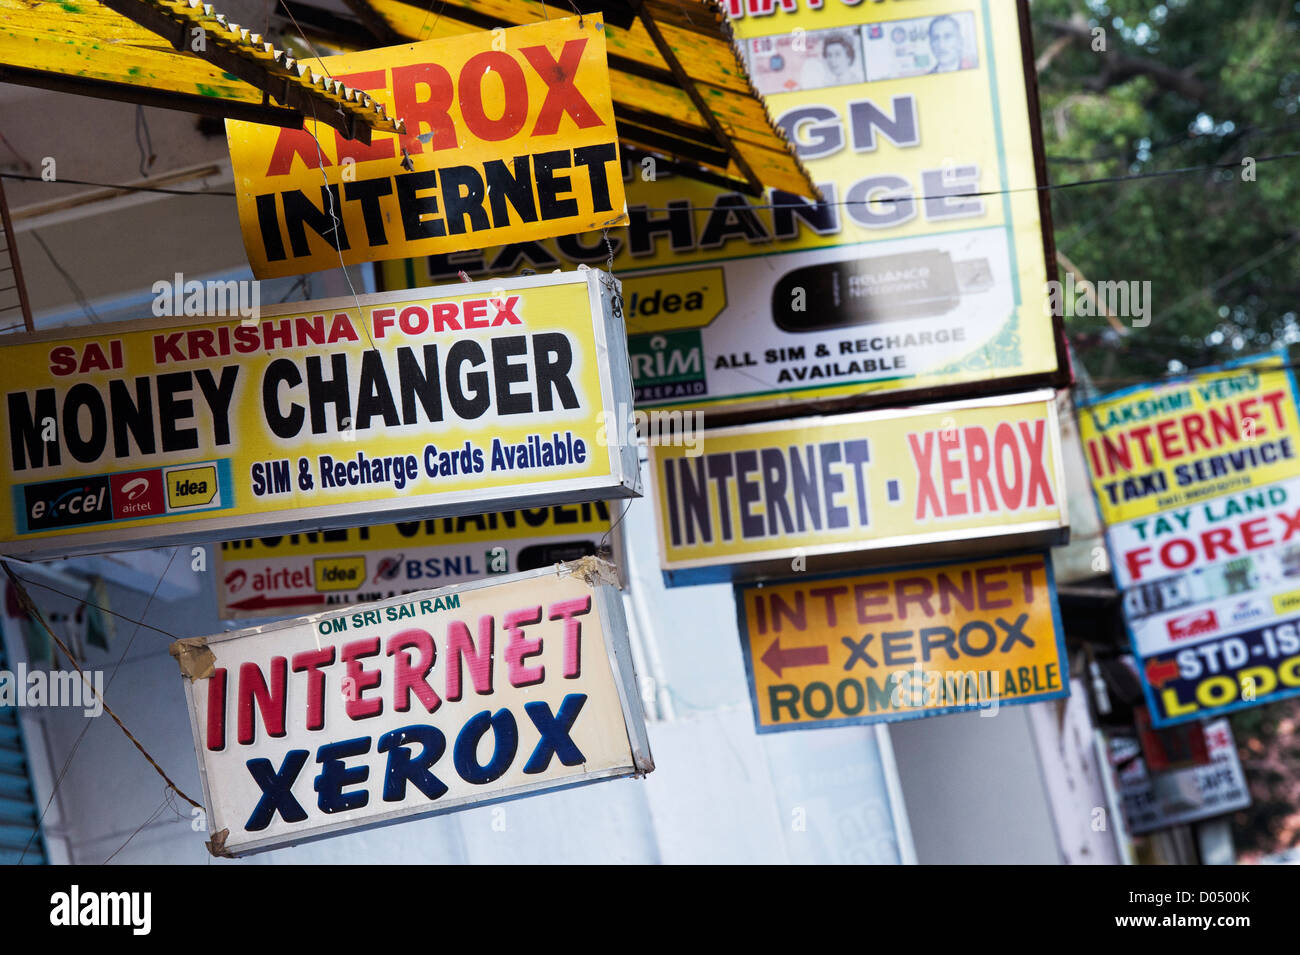 Indian Internet, xerox and money changer signs along an Indian street. Puttaparthi, Andhra Pradesh, India Stock Photo